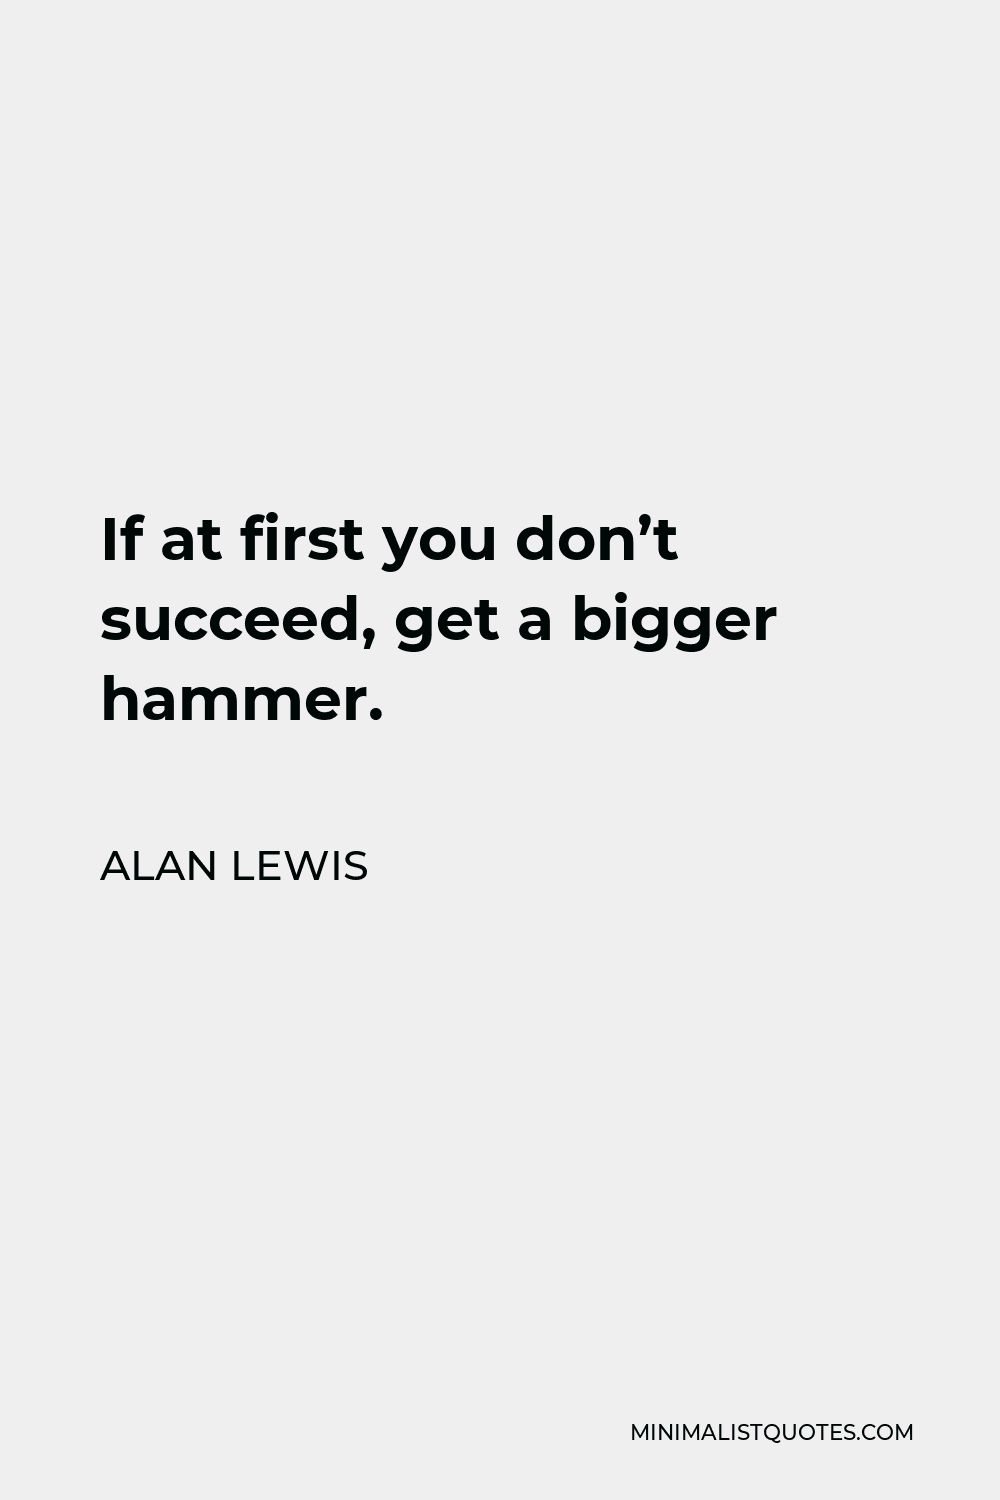 Alan Lewis Quote - If at first you don’t succeed, get a bigger hammer.